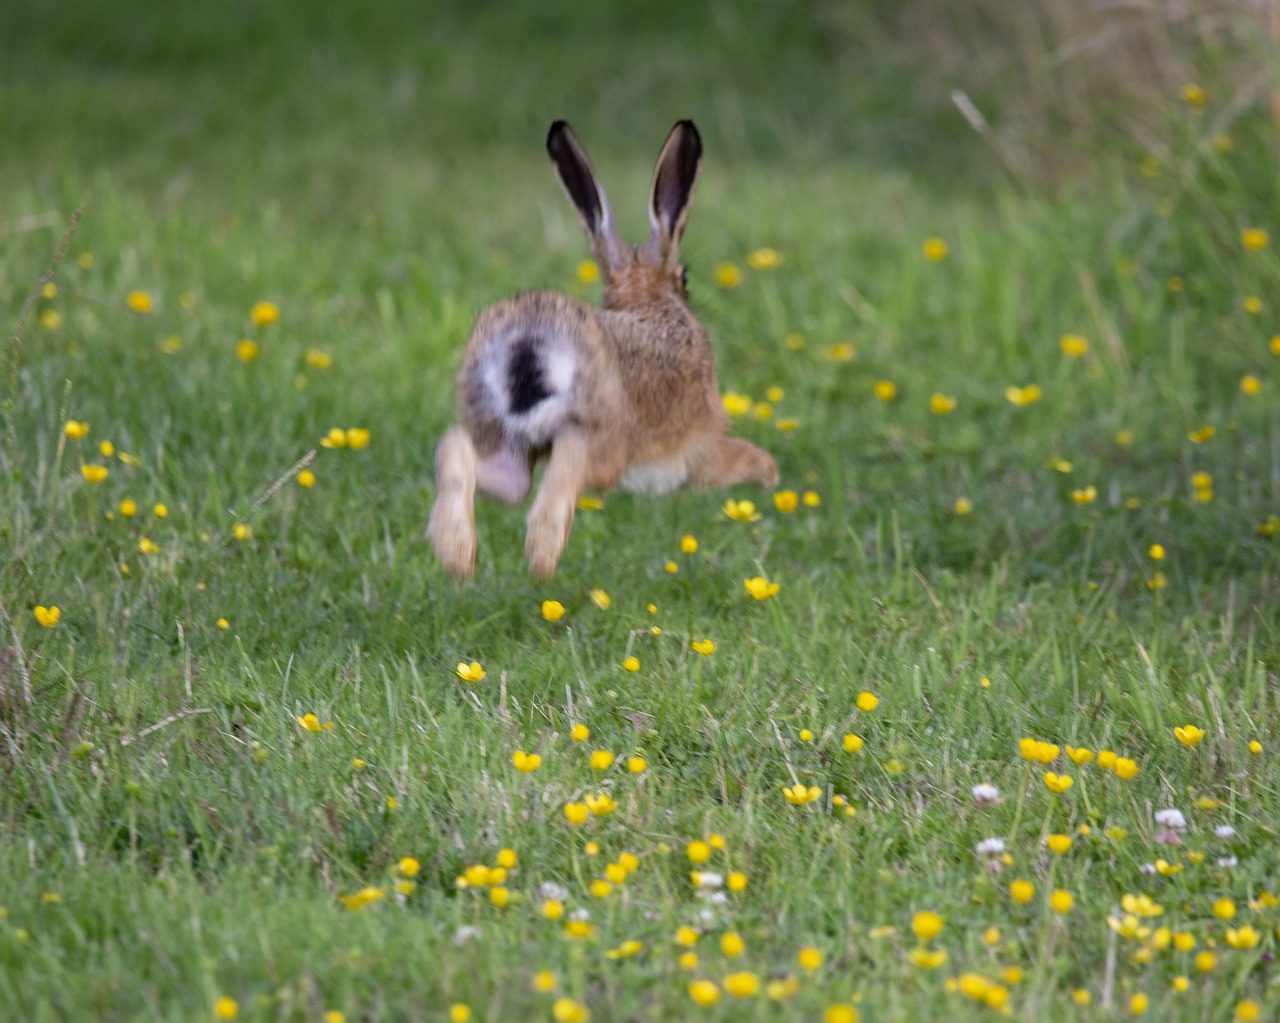 a rabbit that is running in the grass, a picture, by Robert Brackman, happening, rear-shot, flowers around, take off, marcus whinney